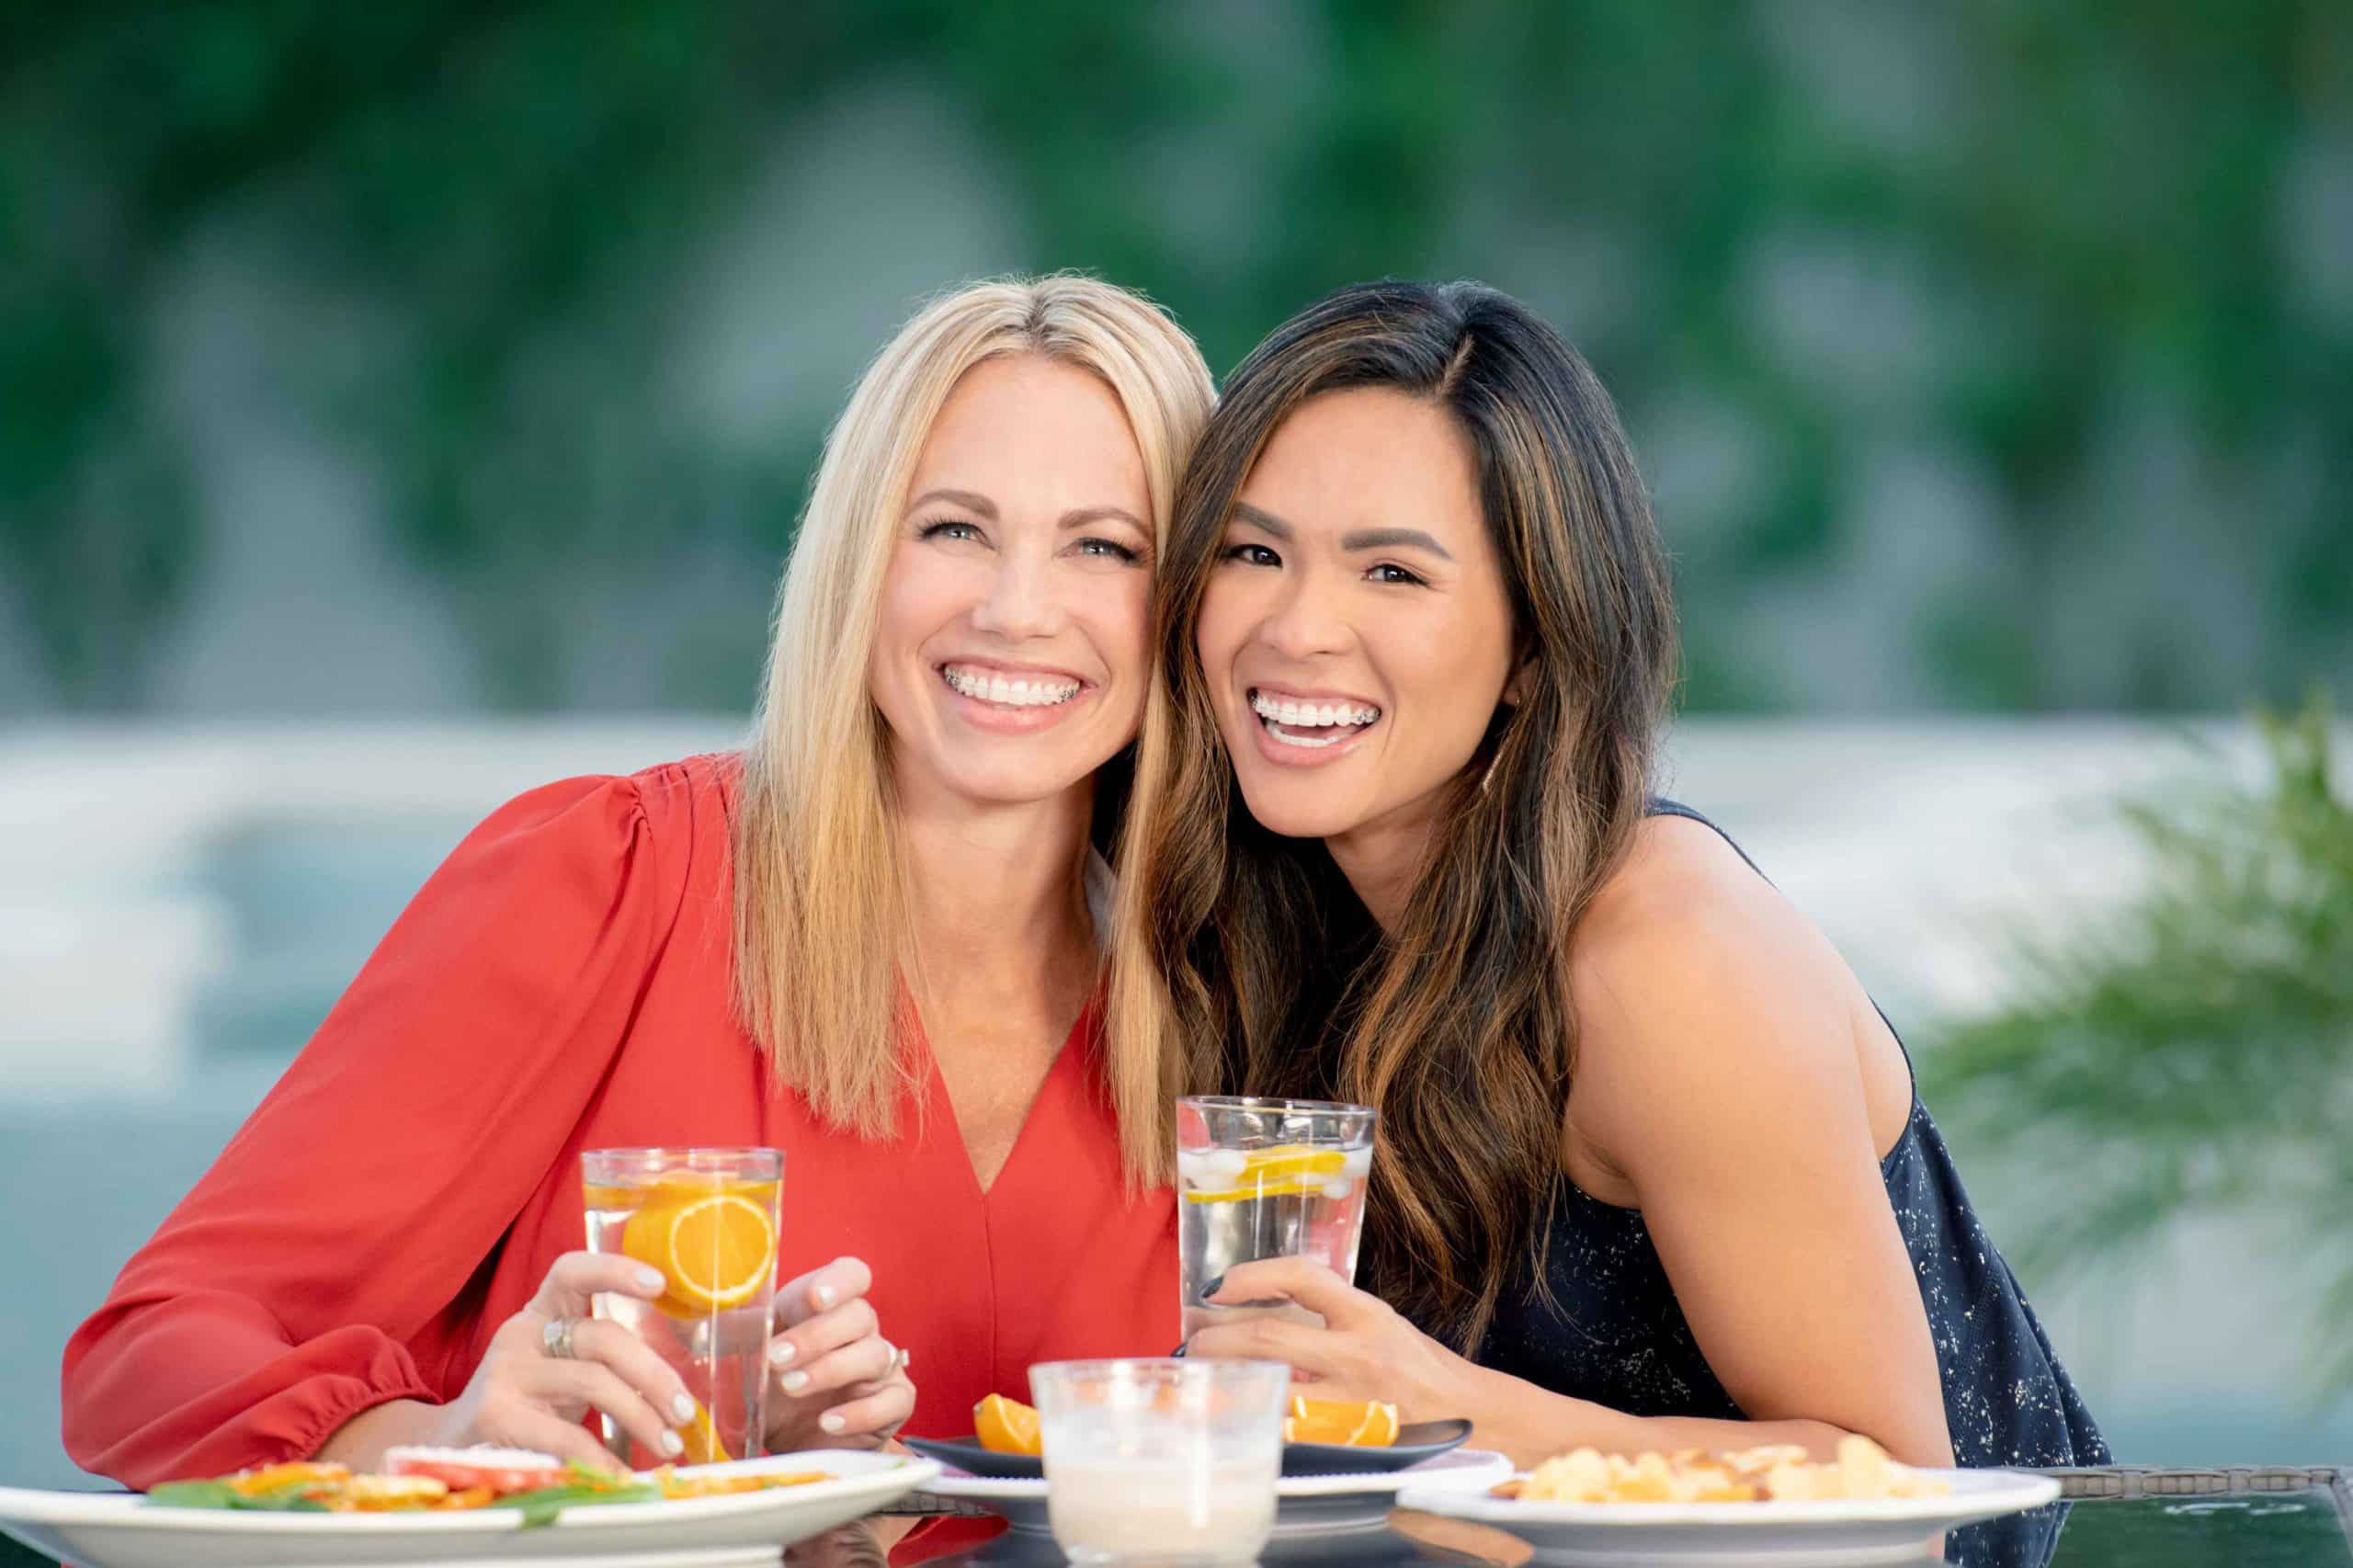 Two women sitting together and smiling at brunch.